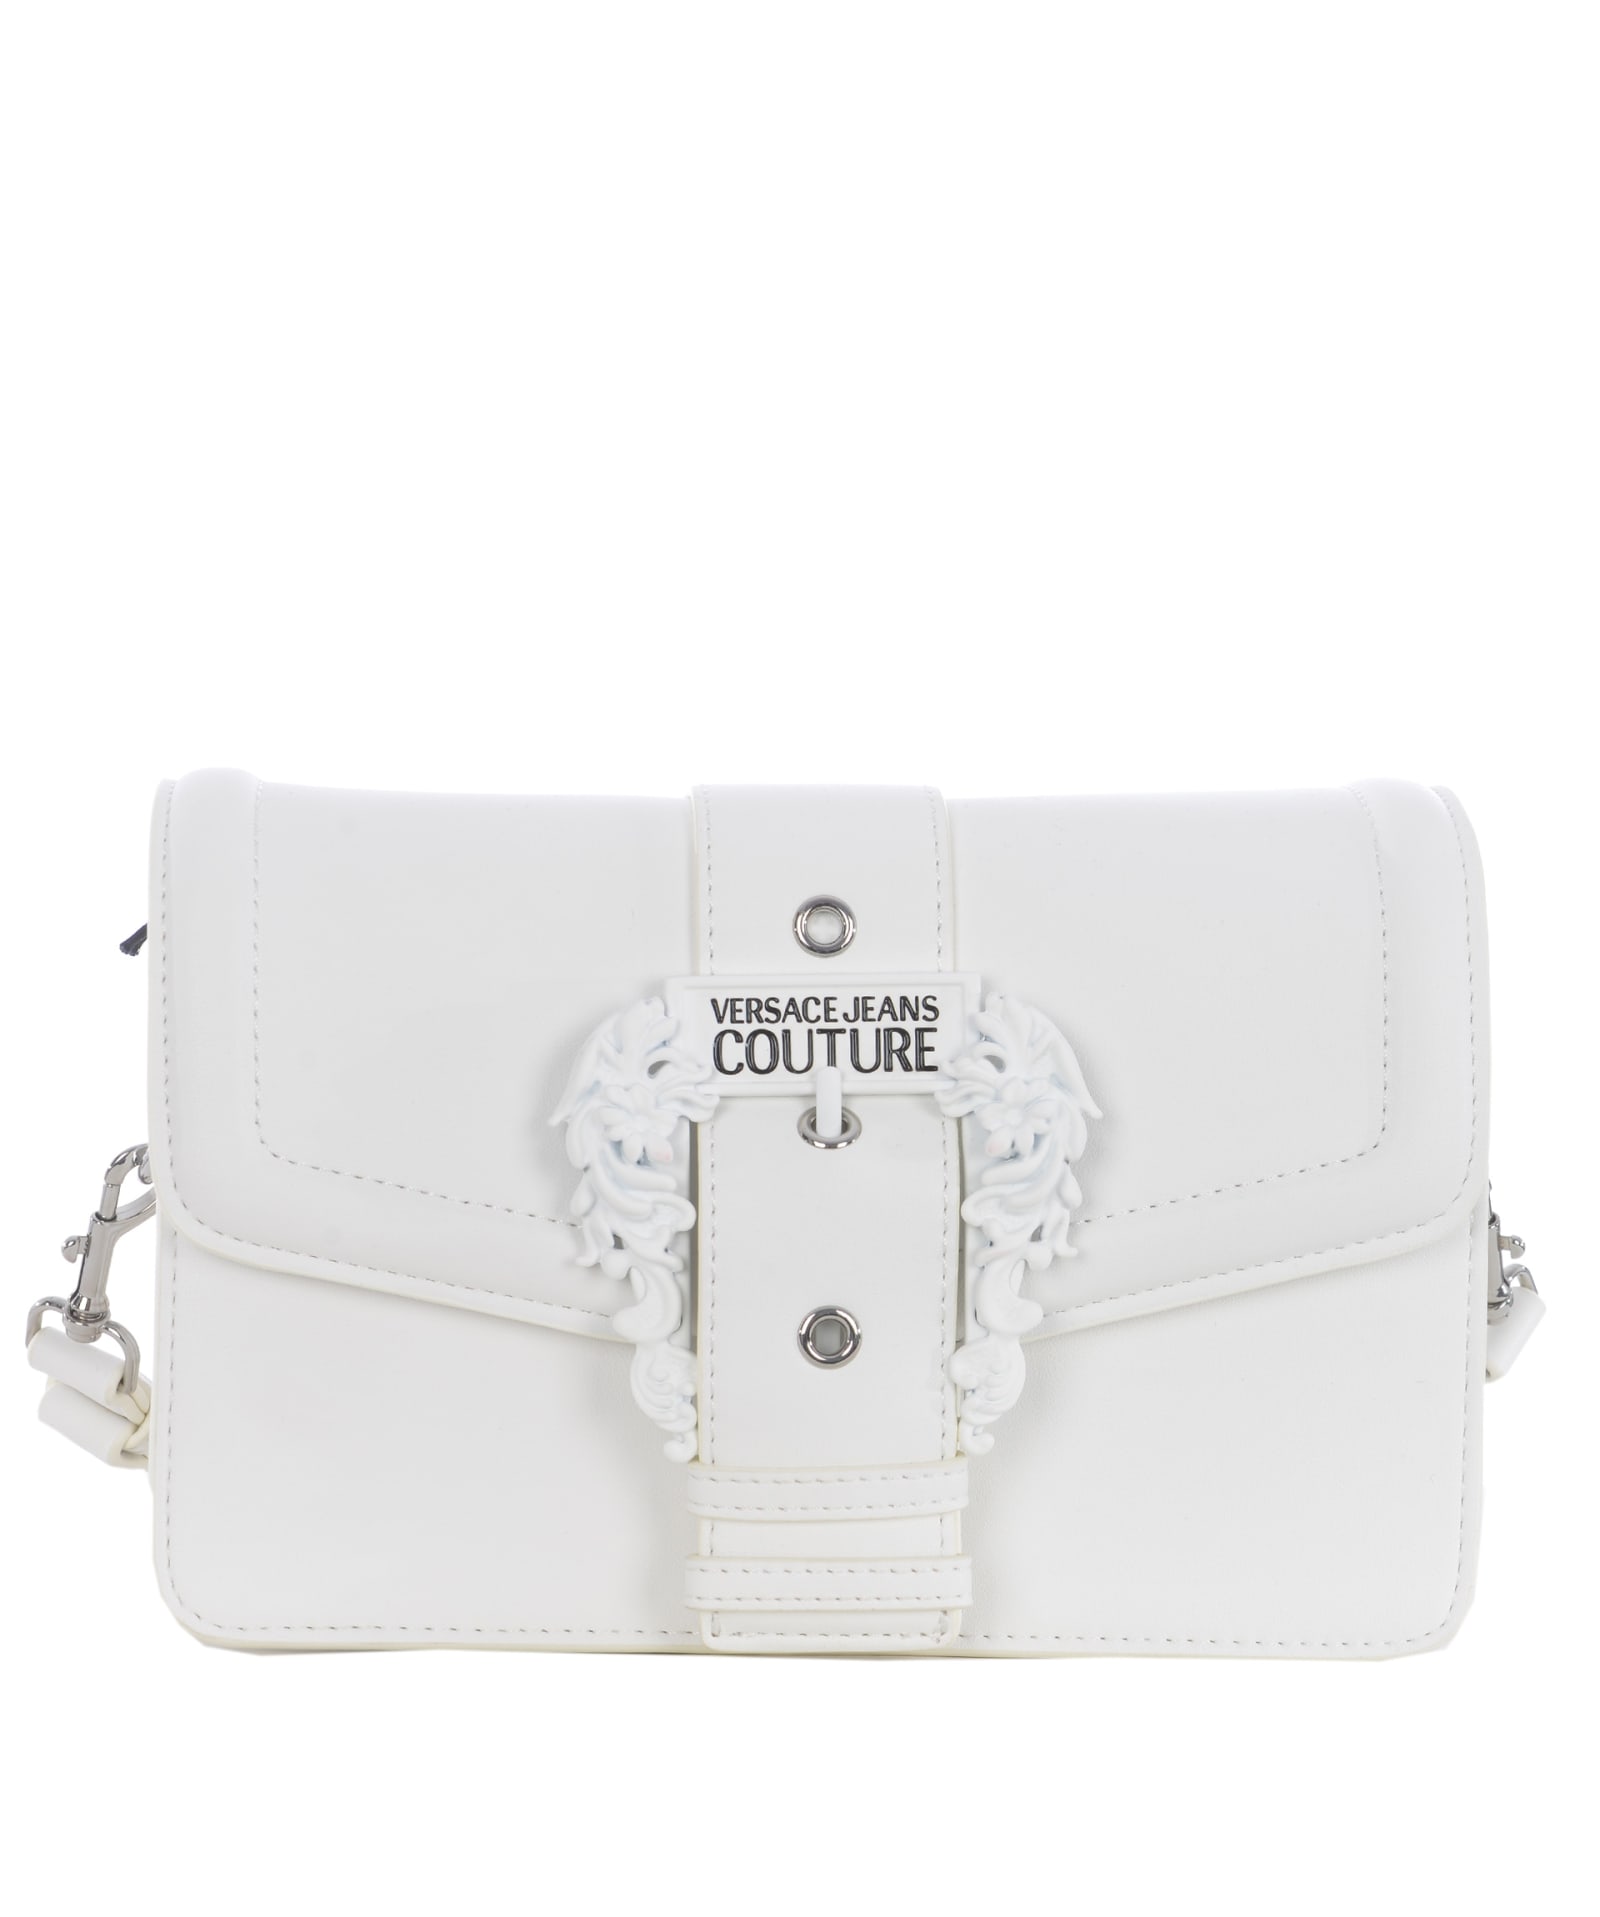 VERSACE JEANS COUTURE BAG,11279835